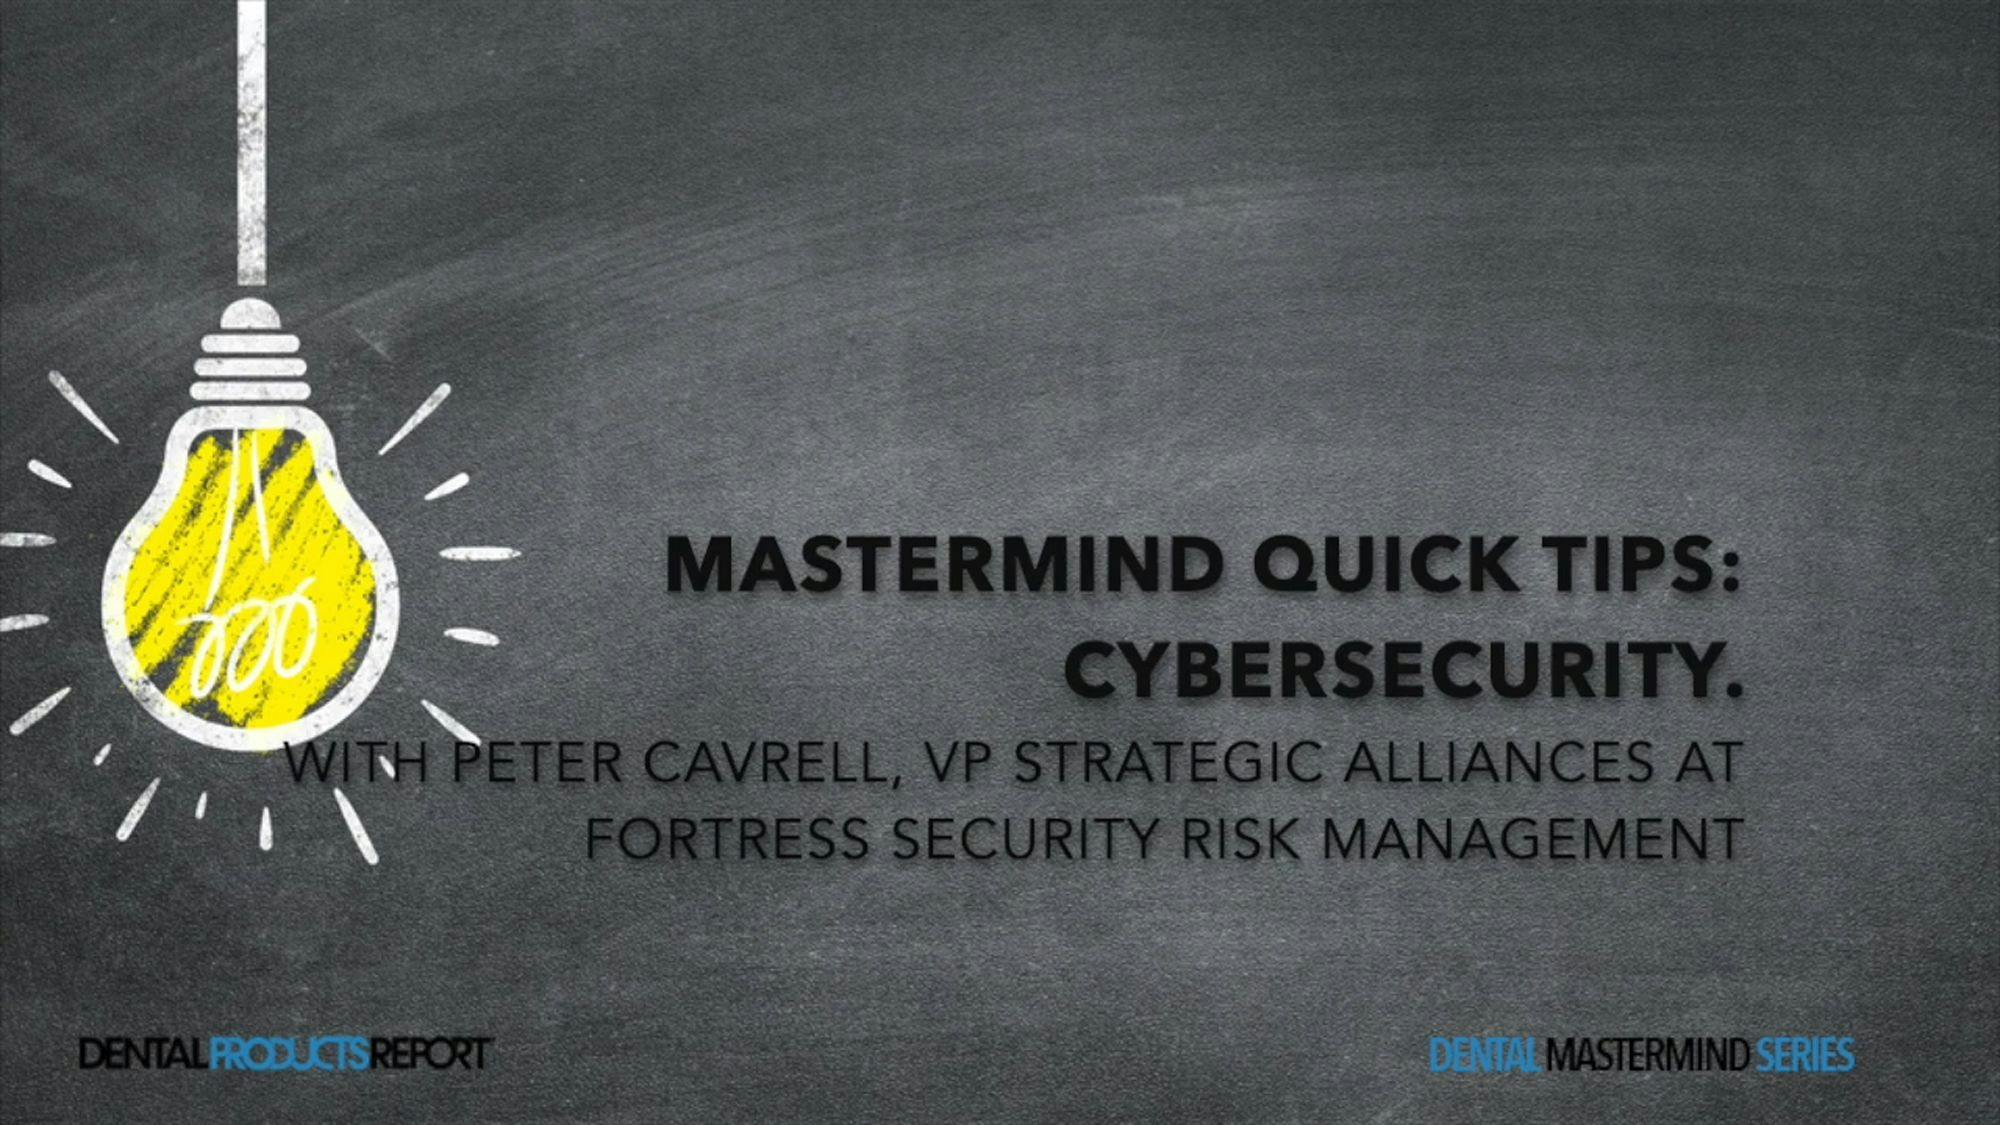 Mastermind Quick Tips: Cybersecurity